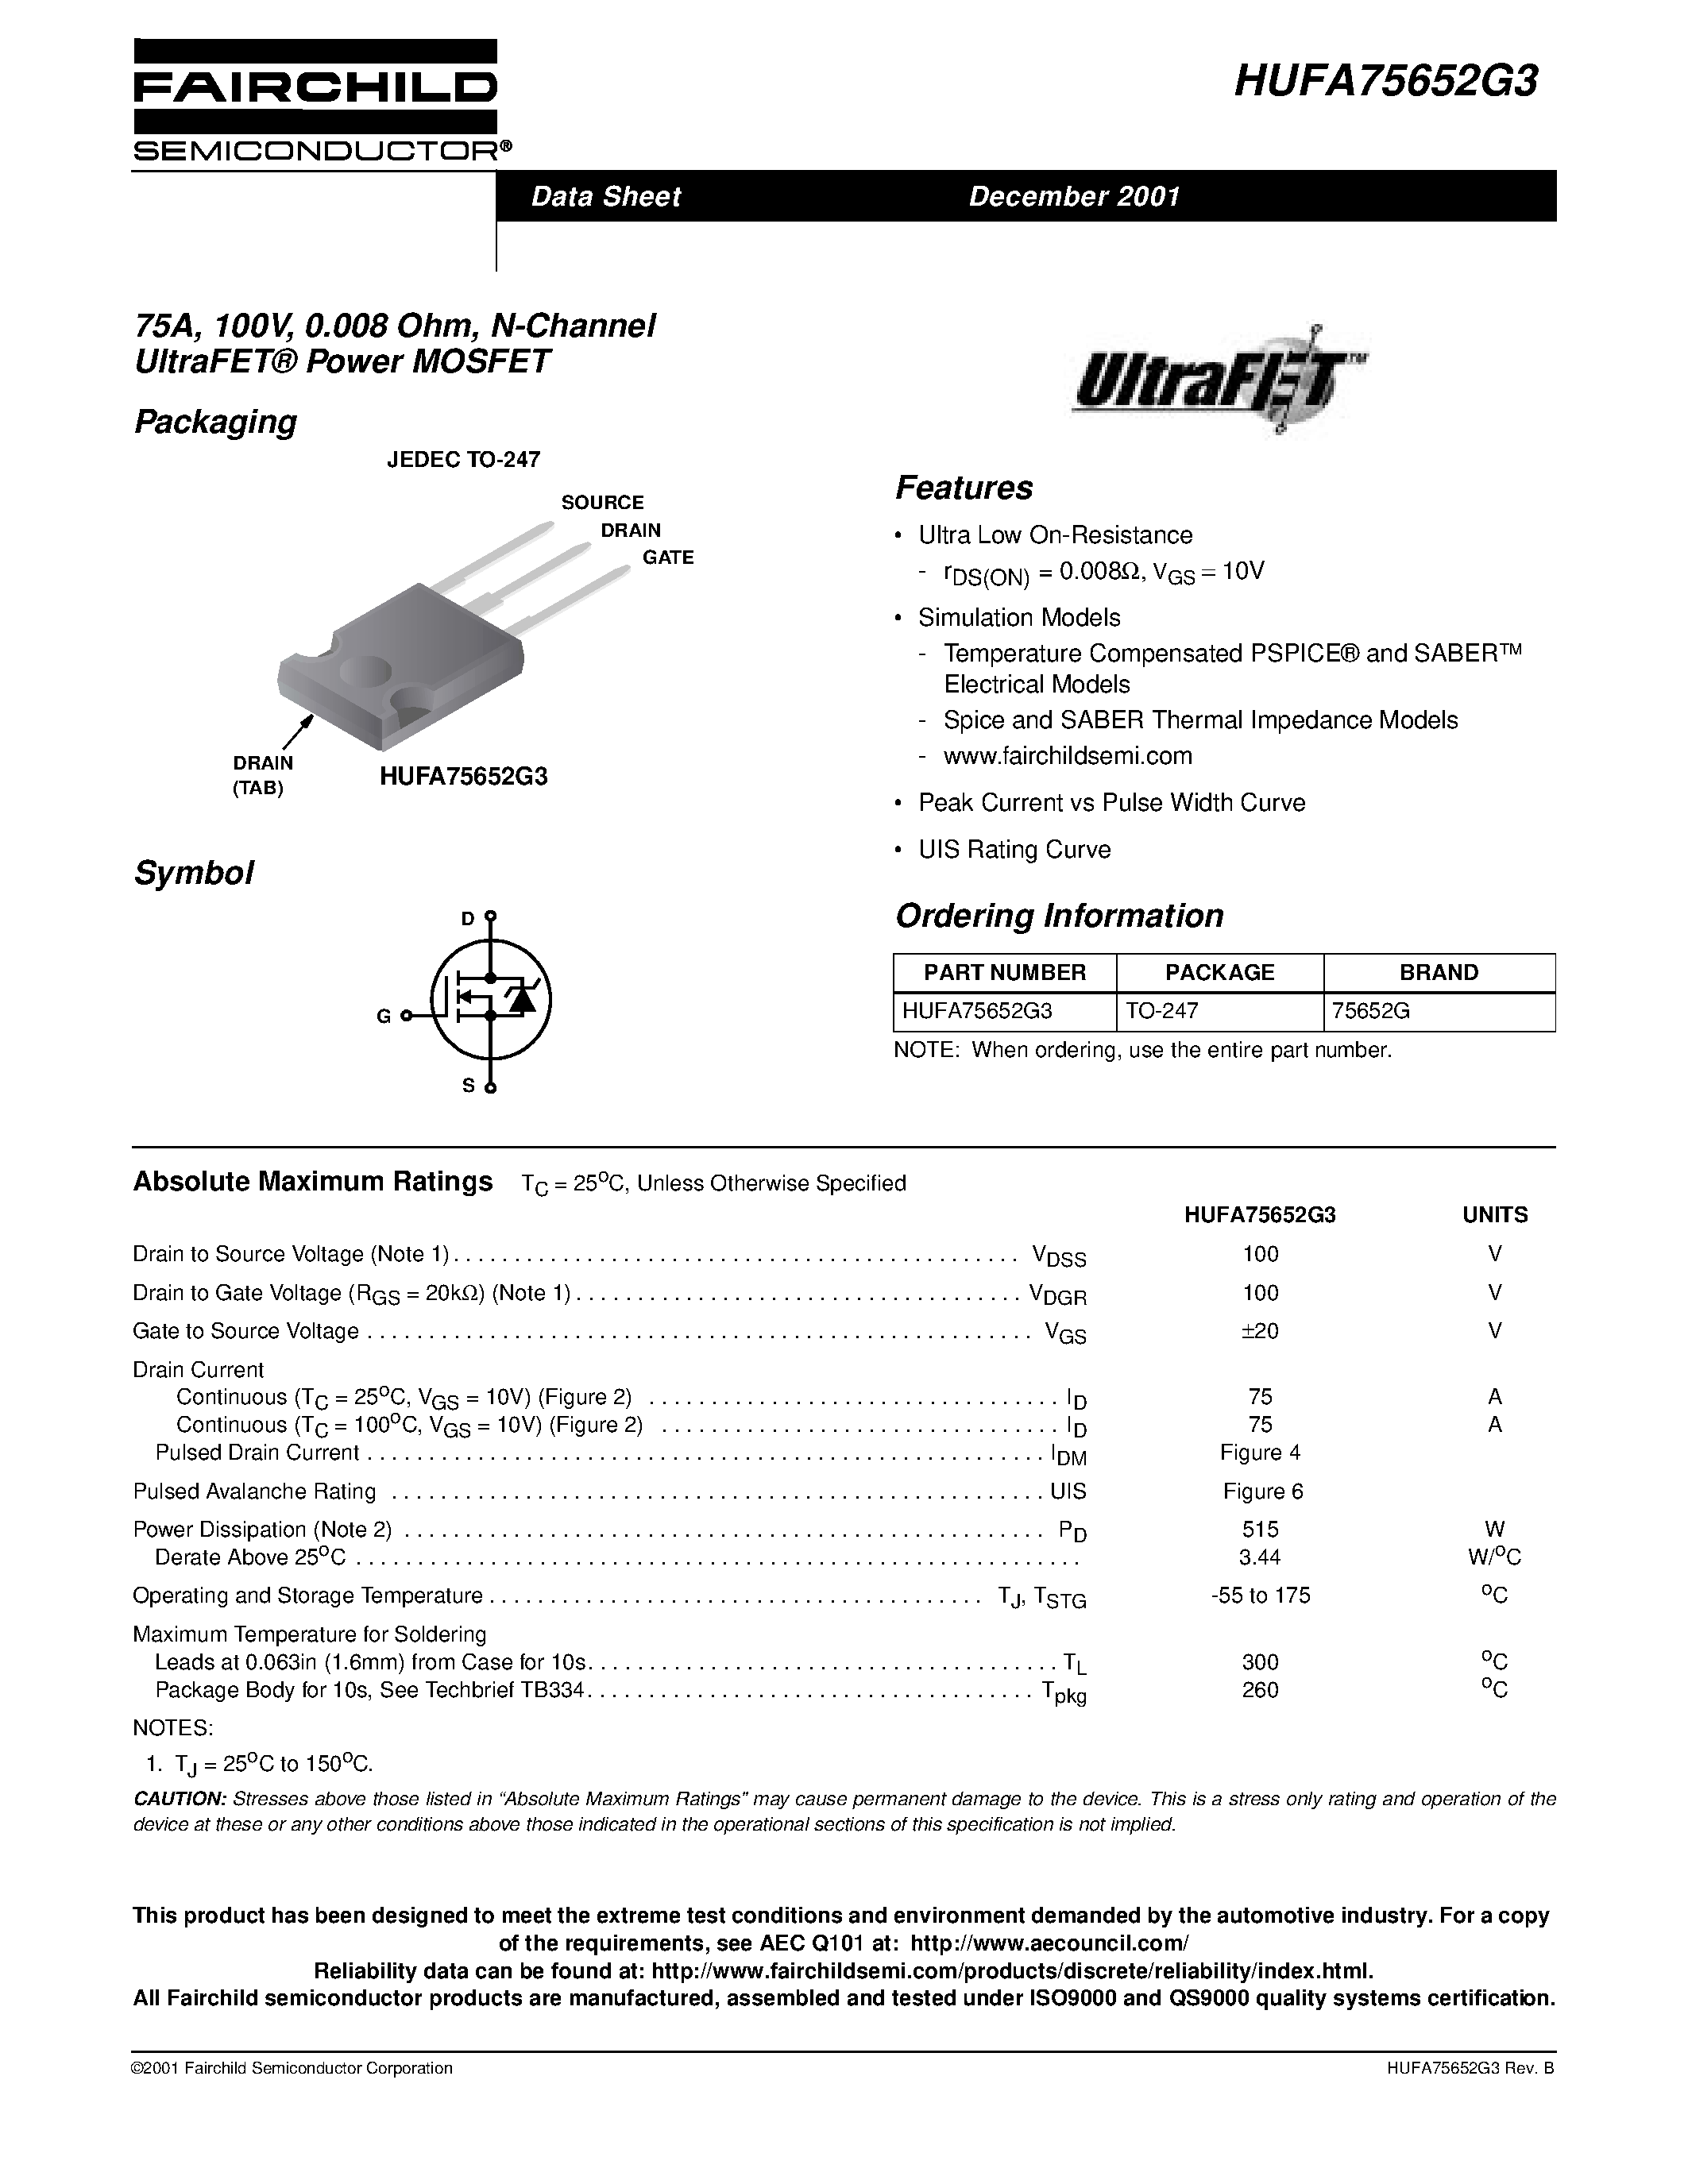 Datasheet HUFA75652G3 - 75A/ 100V/ 0.008 Ohm/ N-Channel UltraFET Power MOSFET page 1